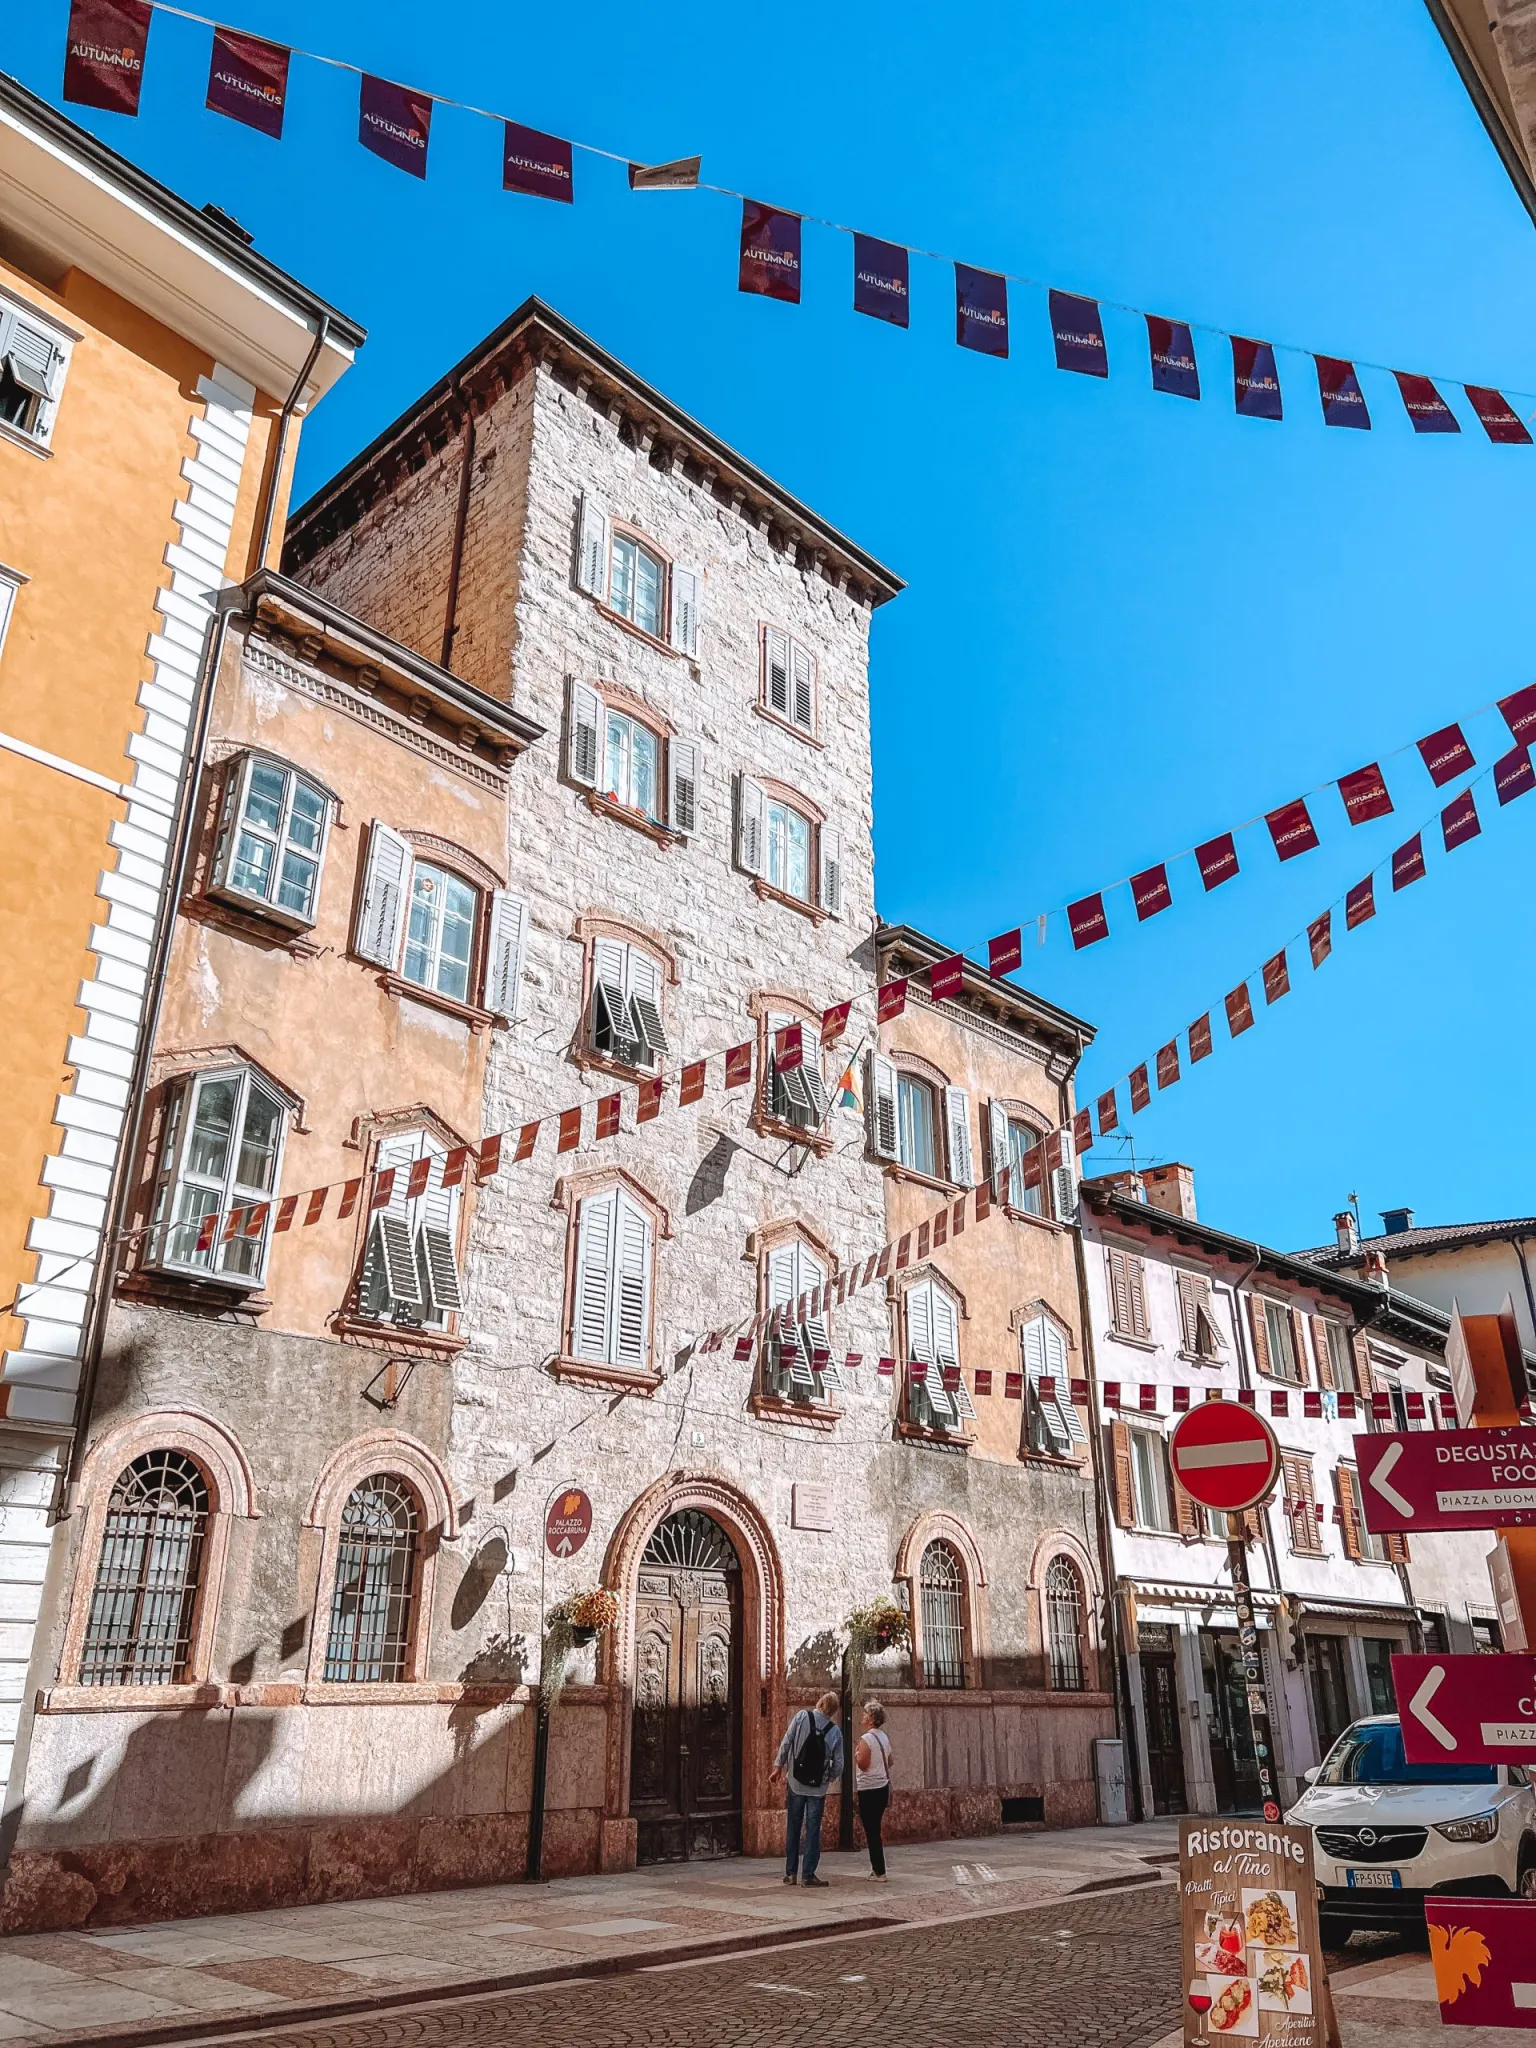 Trento, Italy: Exploring the Hidden Charm of Northern Italy